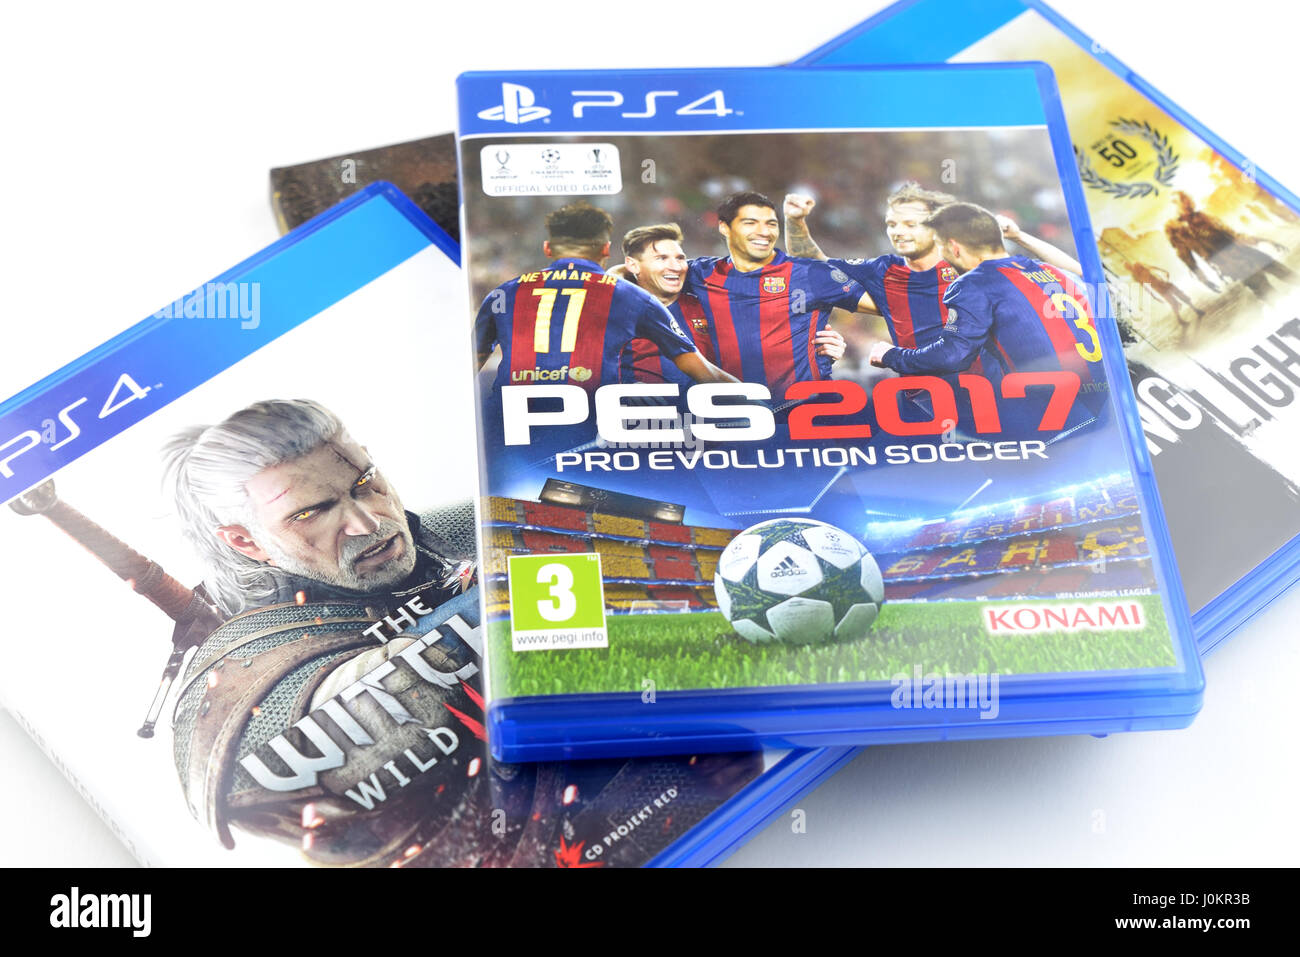 BARCELONA, SPAIN - JAN 24, 2017: A collection of video games for  Playstation 4 devices, including Pro Evolution Soccer and The Witcher 3,  isolated Stock Photo - Alamy